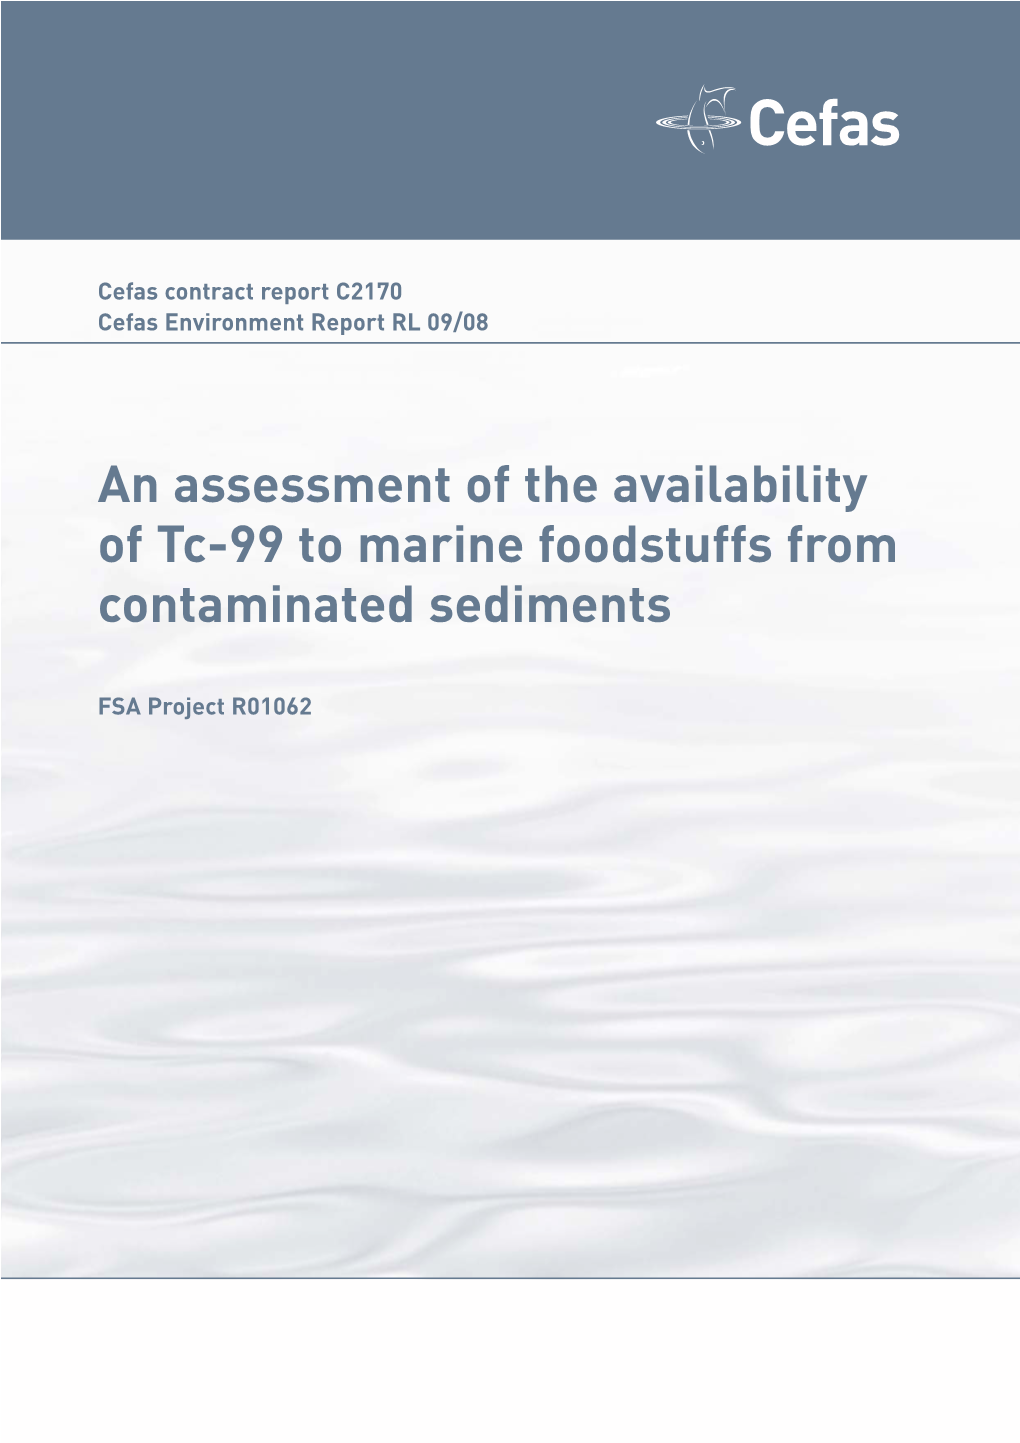 An Assessment of the Availability of Tc-99 to Marine Foodstuffs from Contaminated Sediments